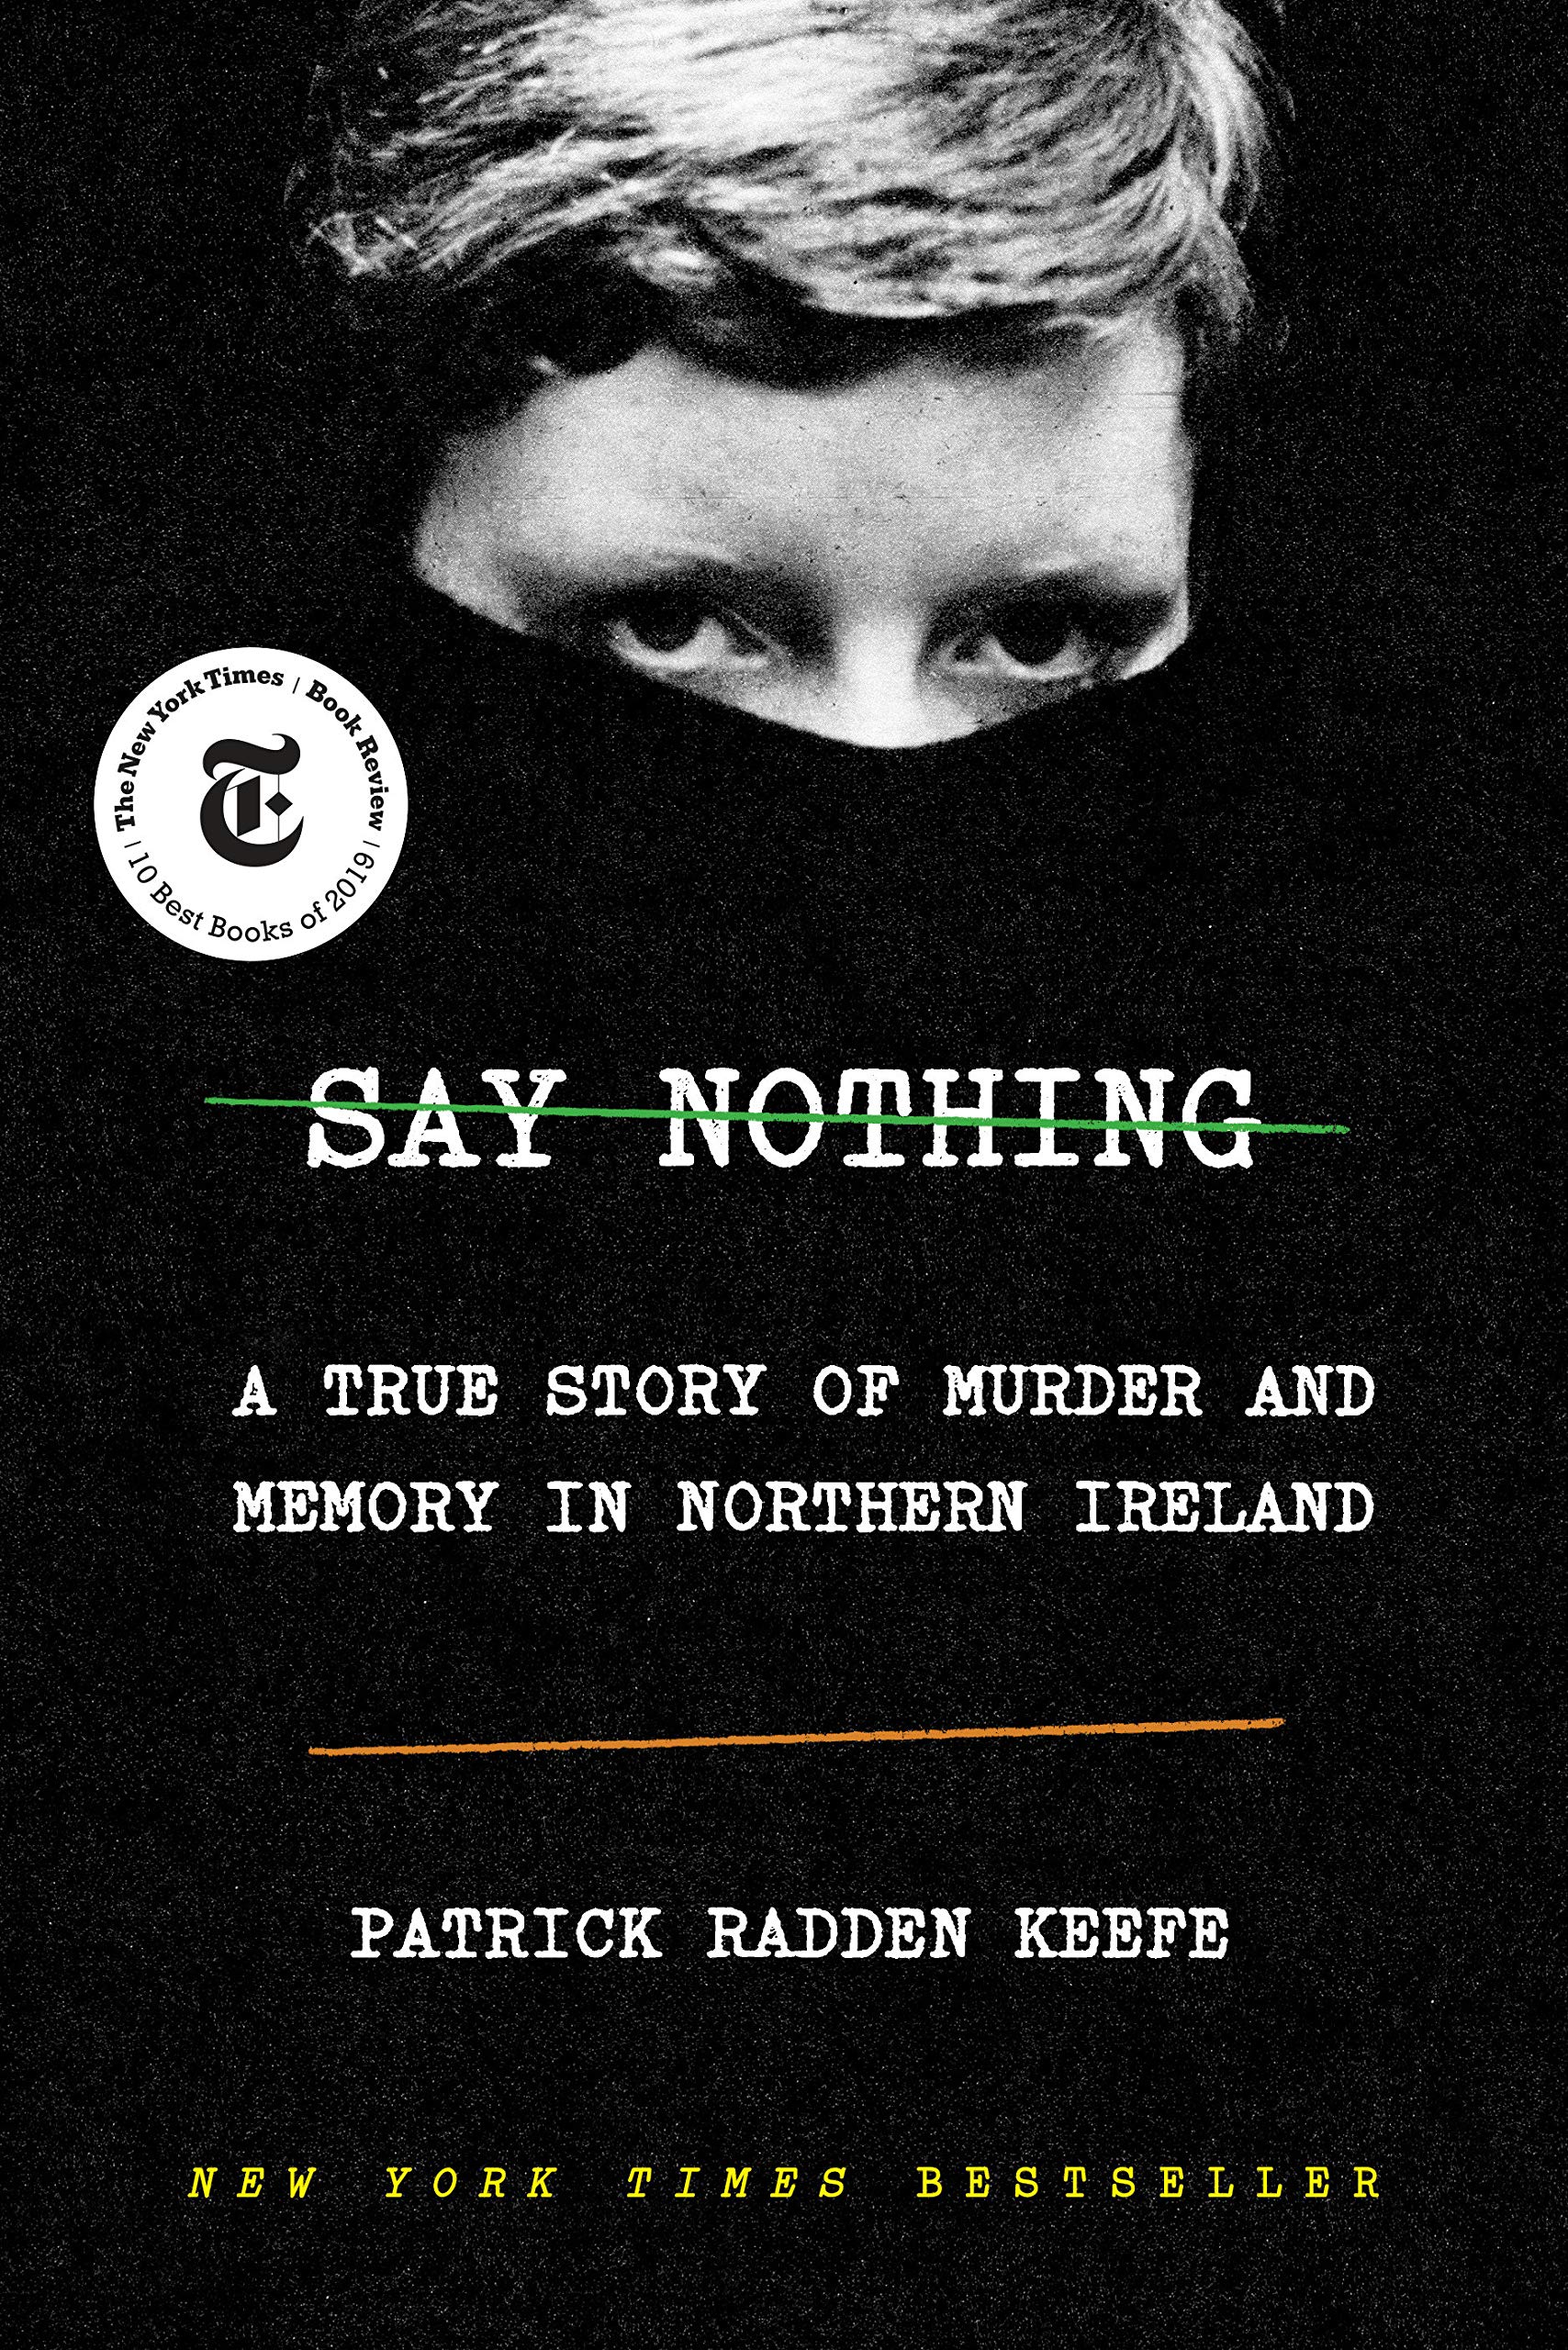 We will be discussing, Say Nothing, written by Patrick Radden Keefe